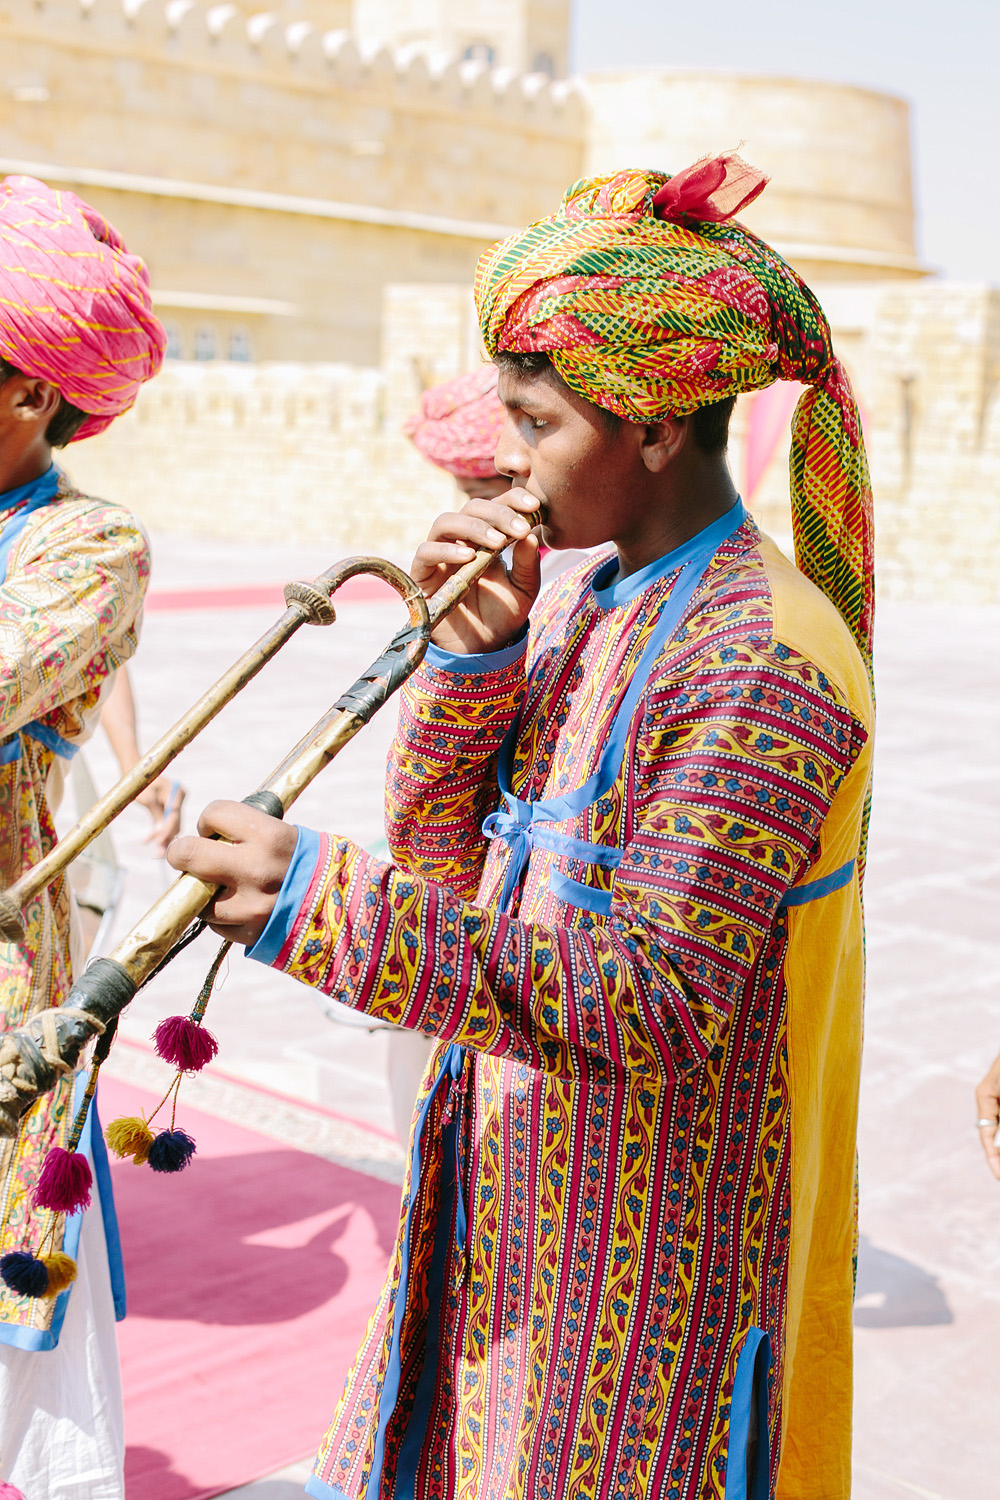 Musician at Suryagarh Palace in India